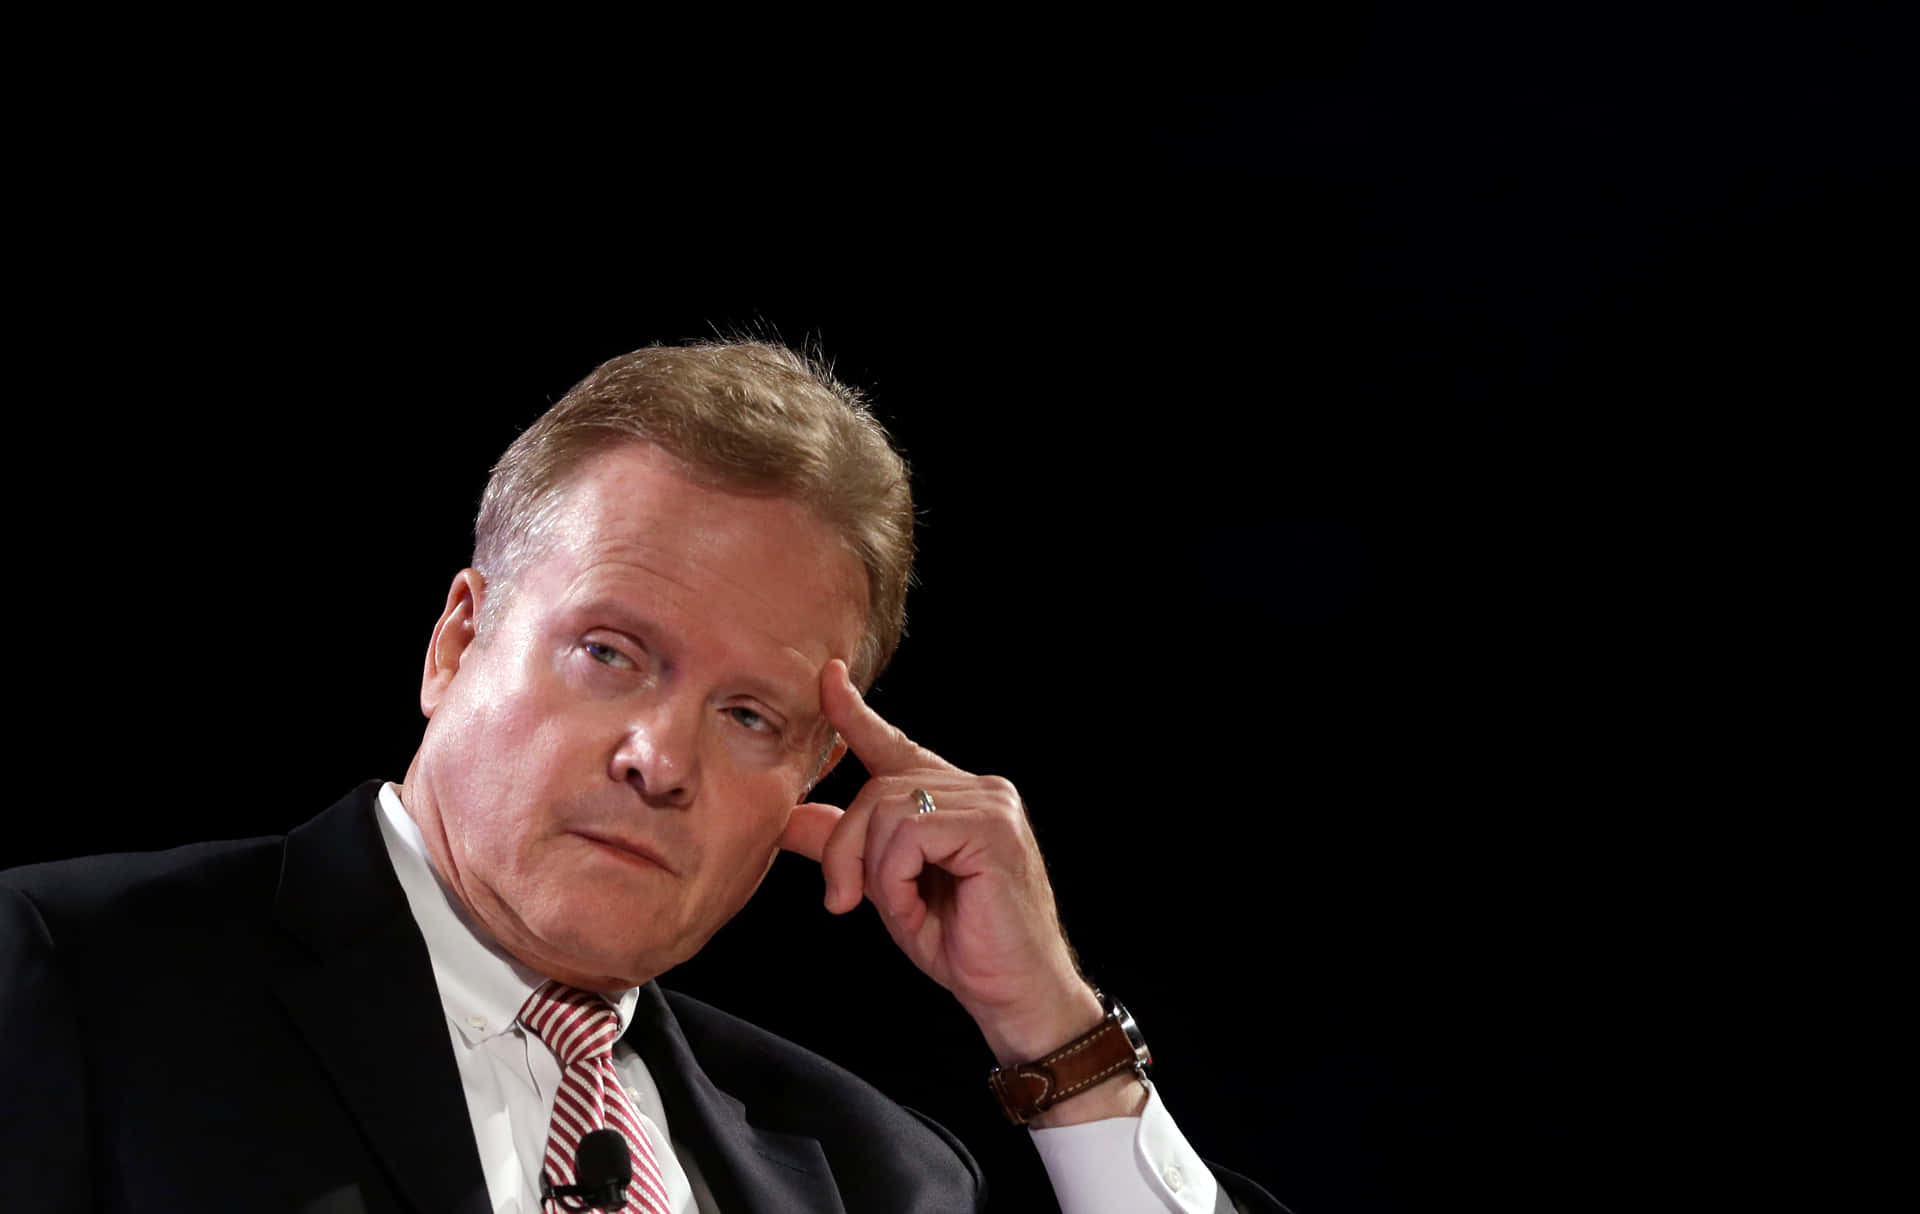 Thoughtful Jim Webb With Finger on Forehead Wallpaper